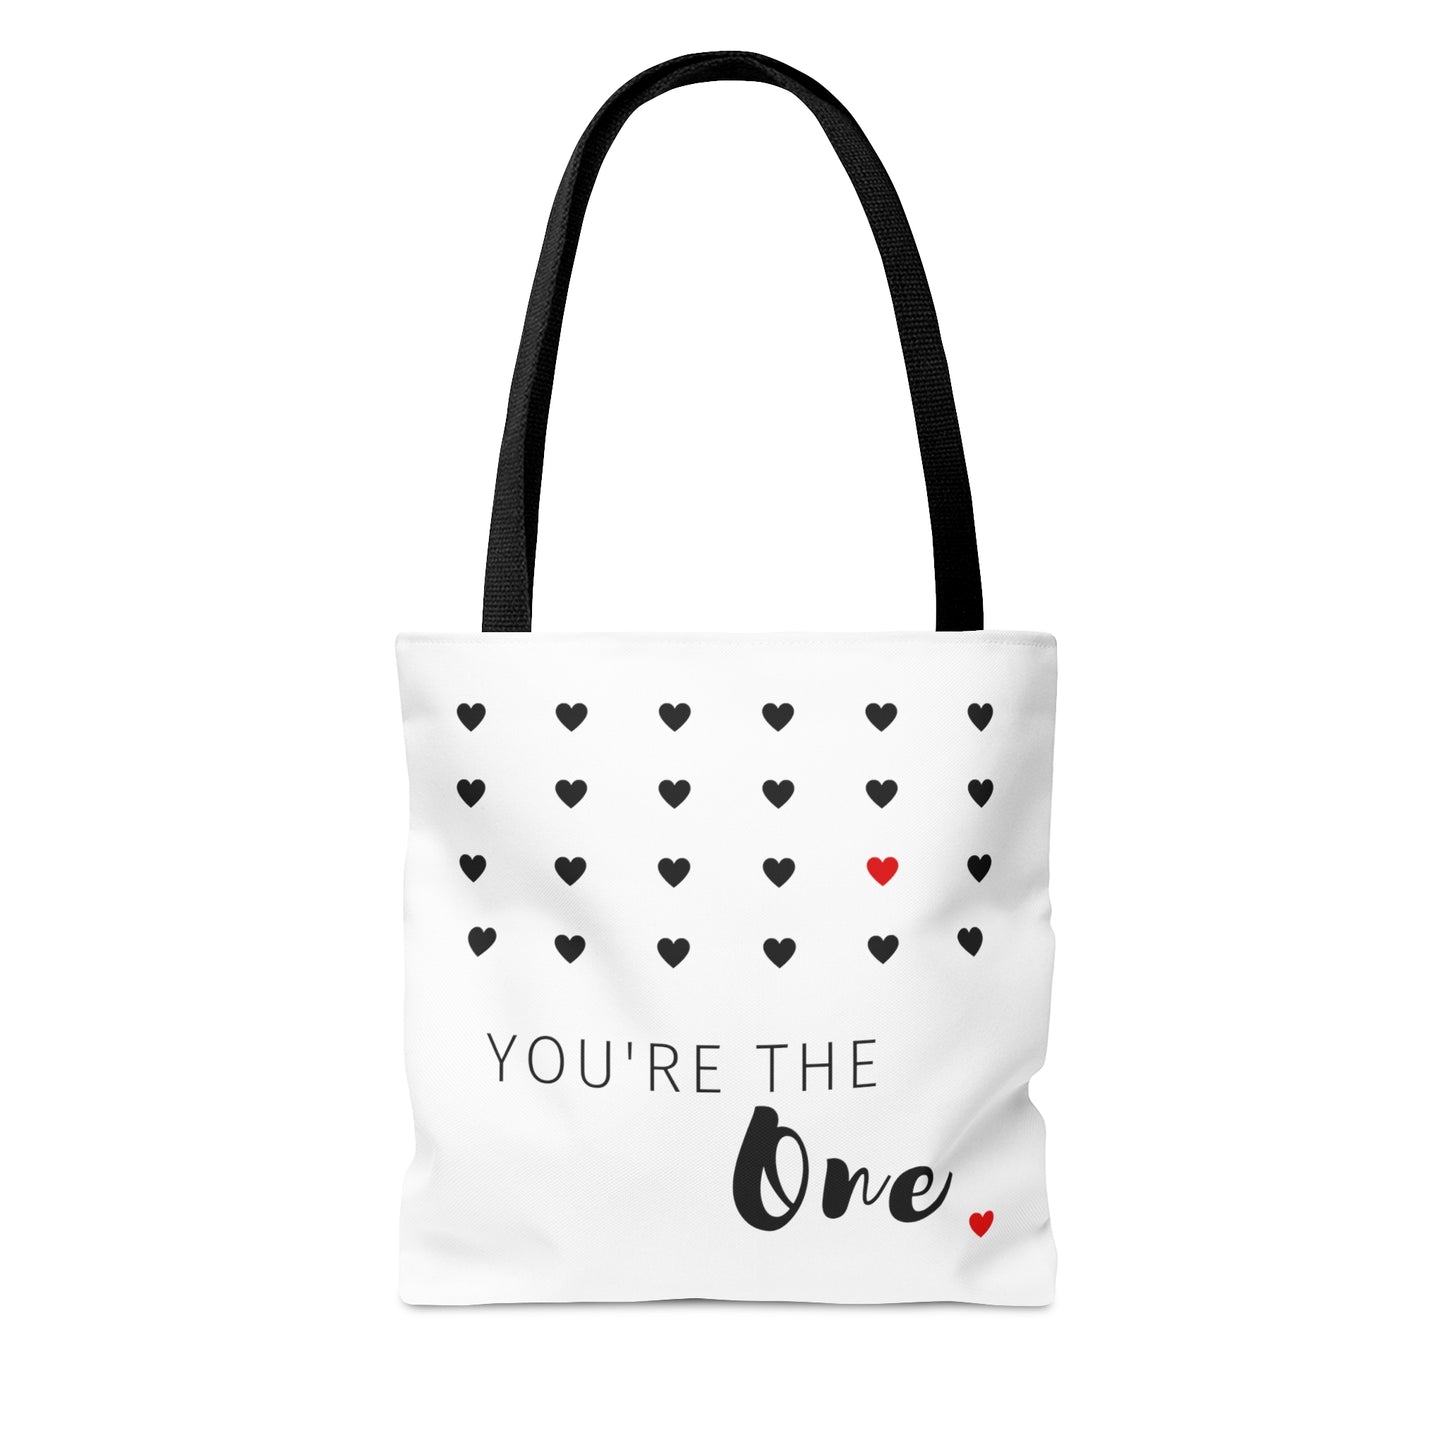 You are the one! with Heart Printed Tote Bag, Valentine Tote Bag